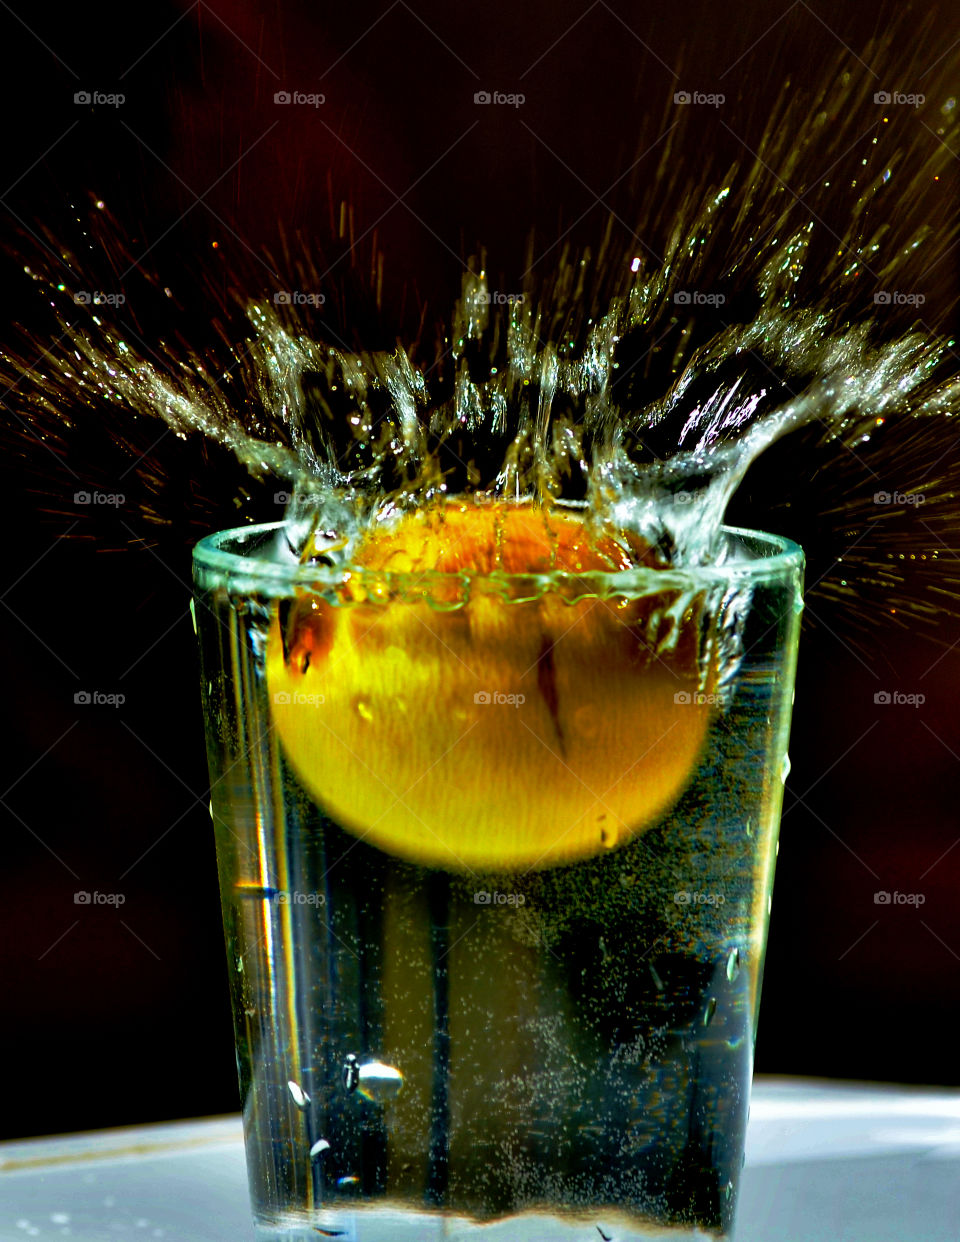 Lemon in the glass of water